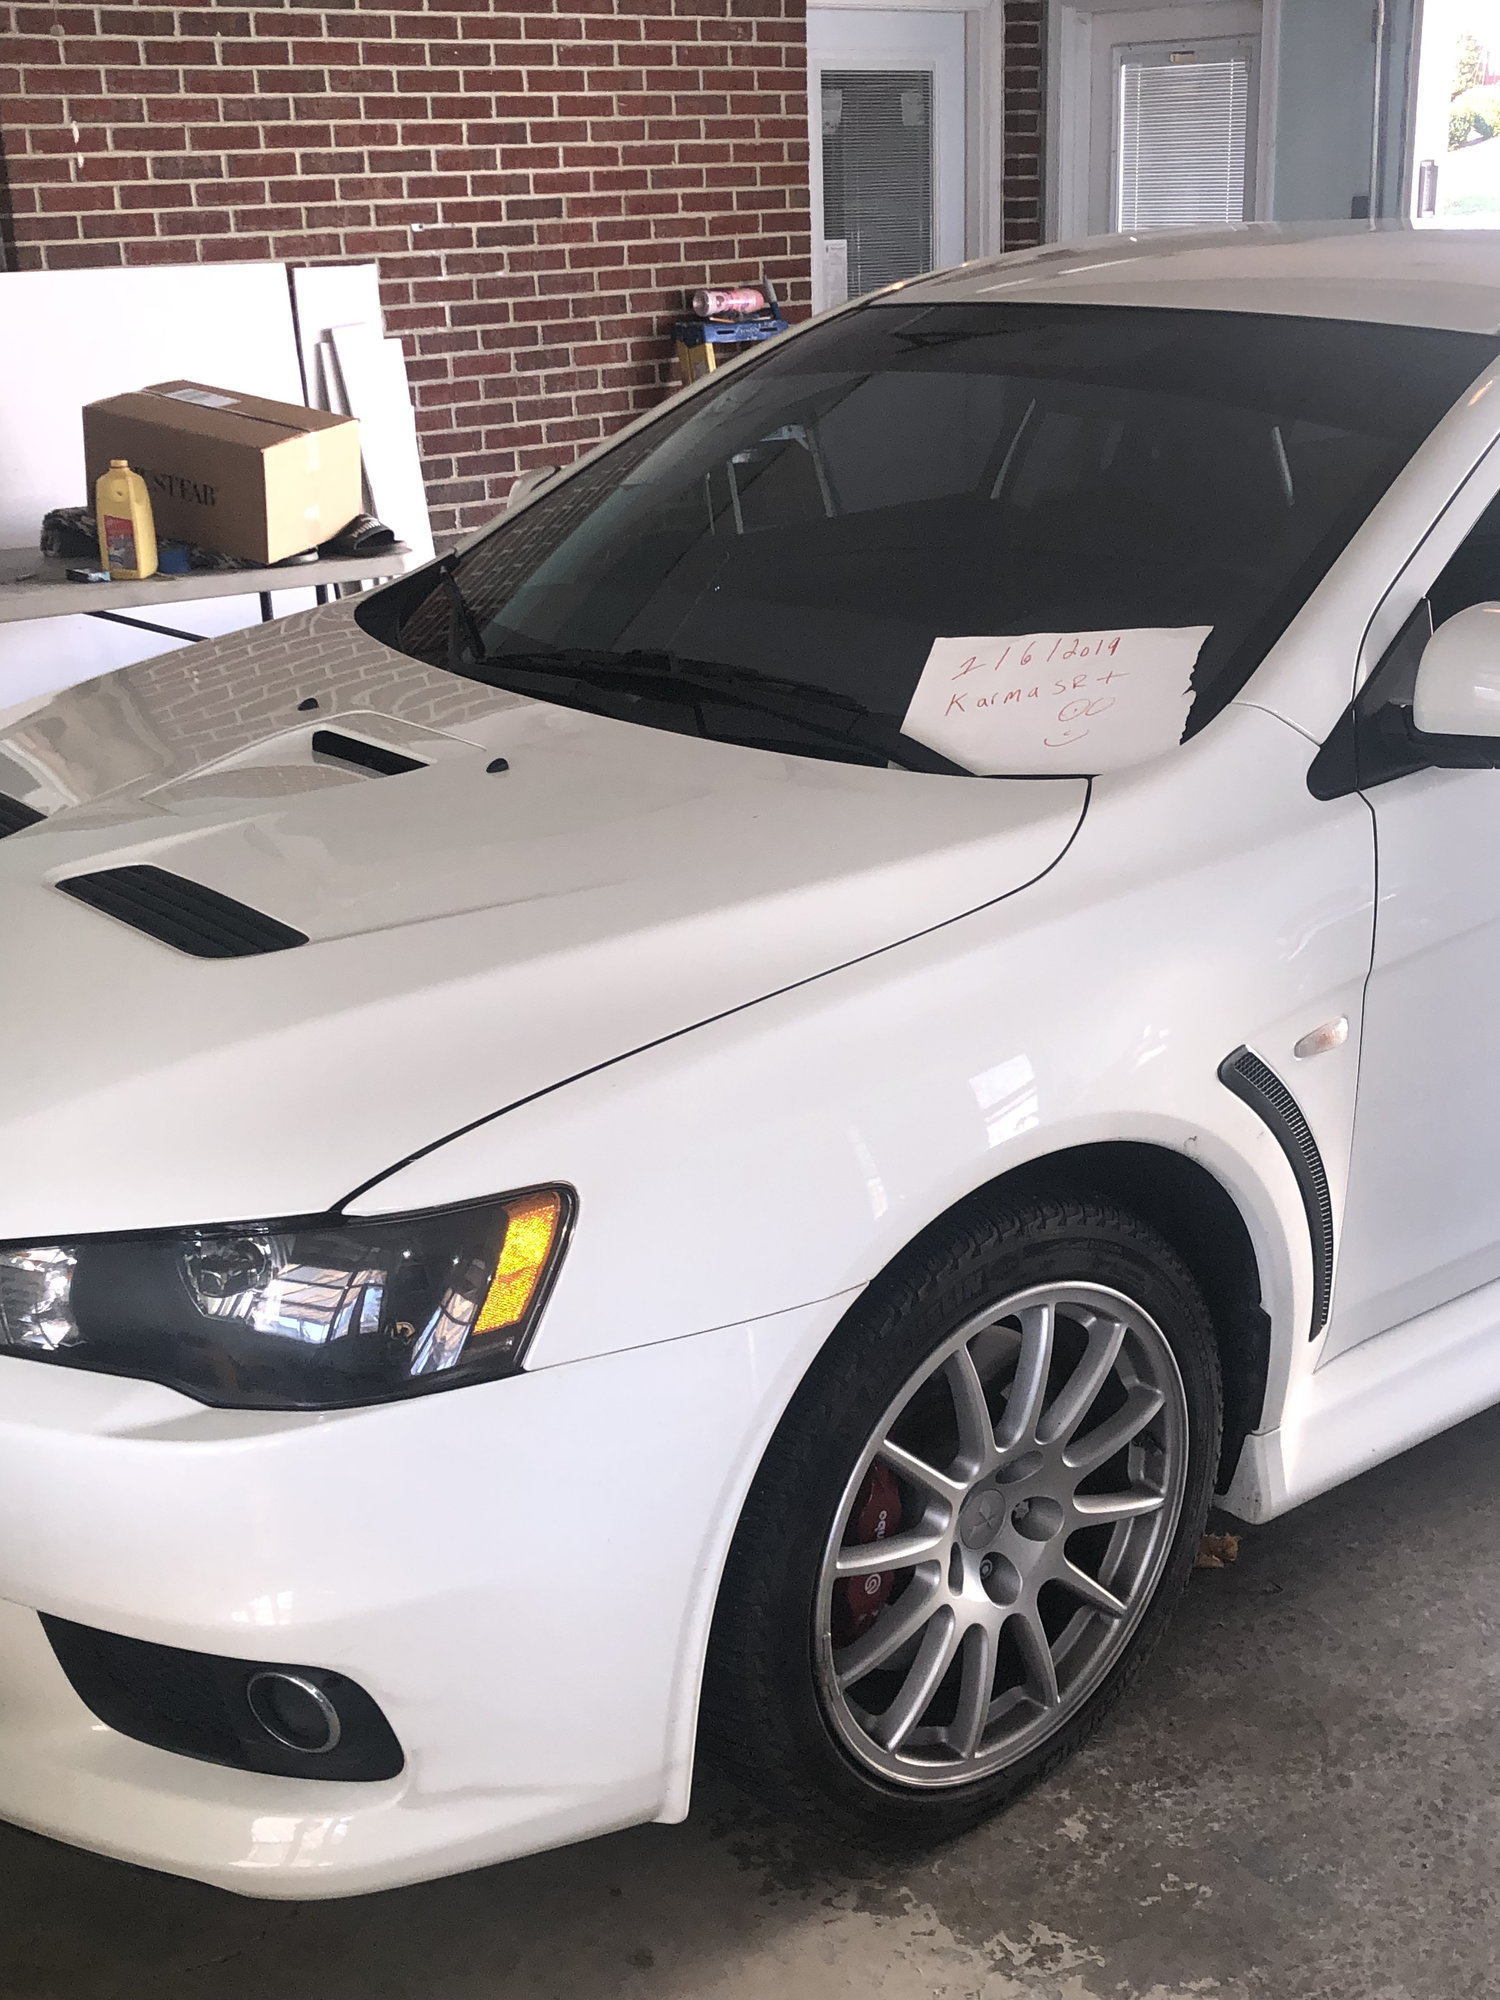 2013 Mitsubishi Lancer Evolution - 2013 Evo x 59,000 miles for sale clean girl driven ! - Used - VIN 2013 Evo x F/s - 58,643 Miles - 4 cyl - AWD - Manual - Sedan - White - Hagerstown, MD 21740, United States